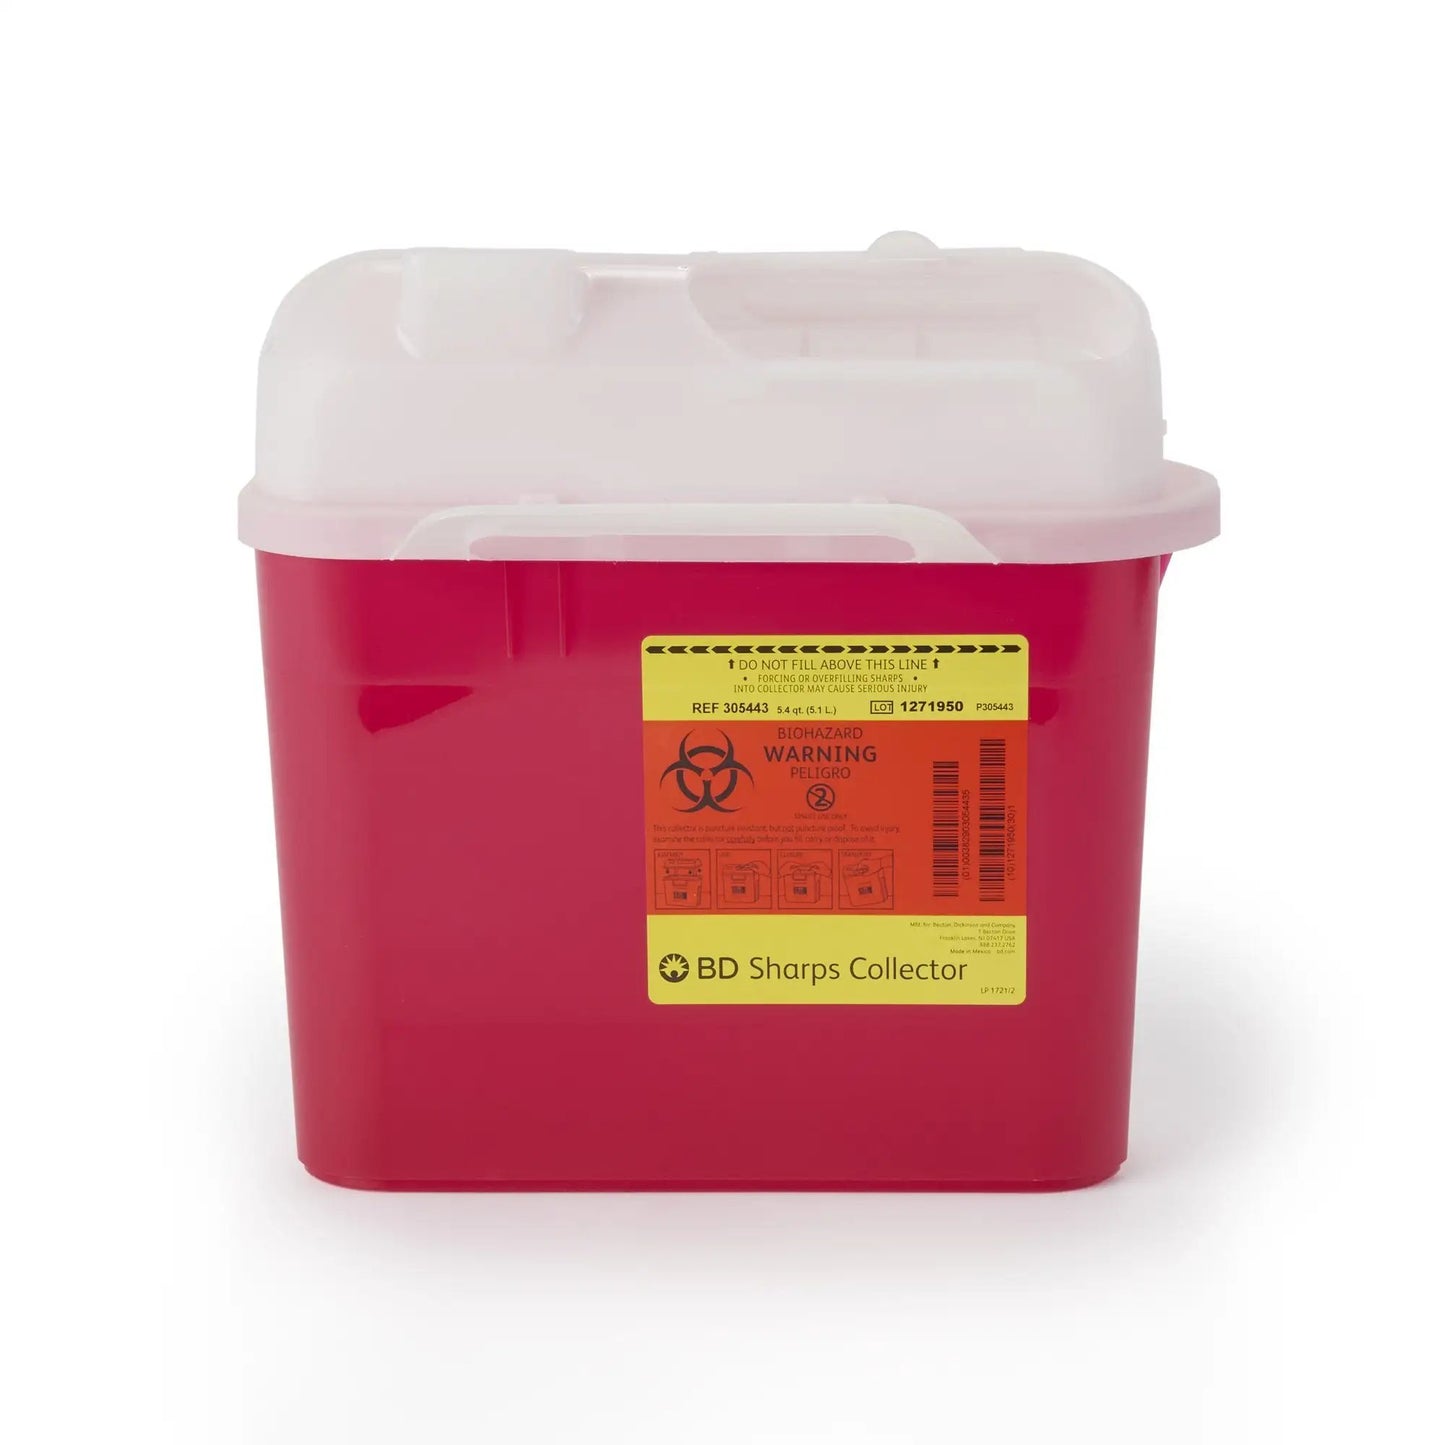 Sharps Container BD Gardian Red Base 11-7/10 H X 16-3/5 W X 4-1/2 D Inch Horizontal Entry 1.35 Gallon